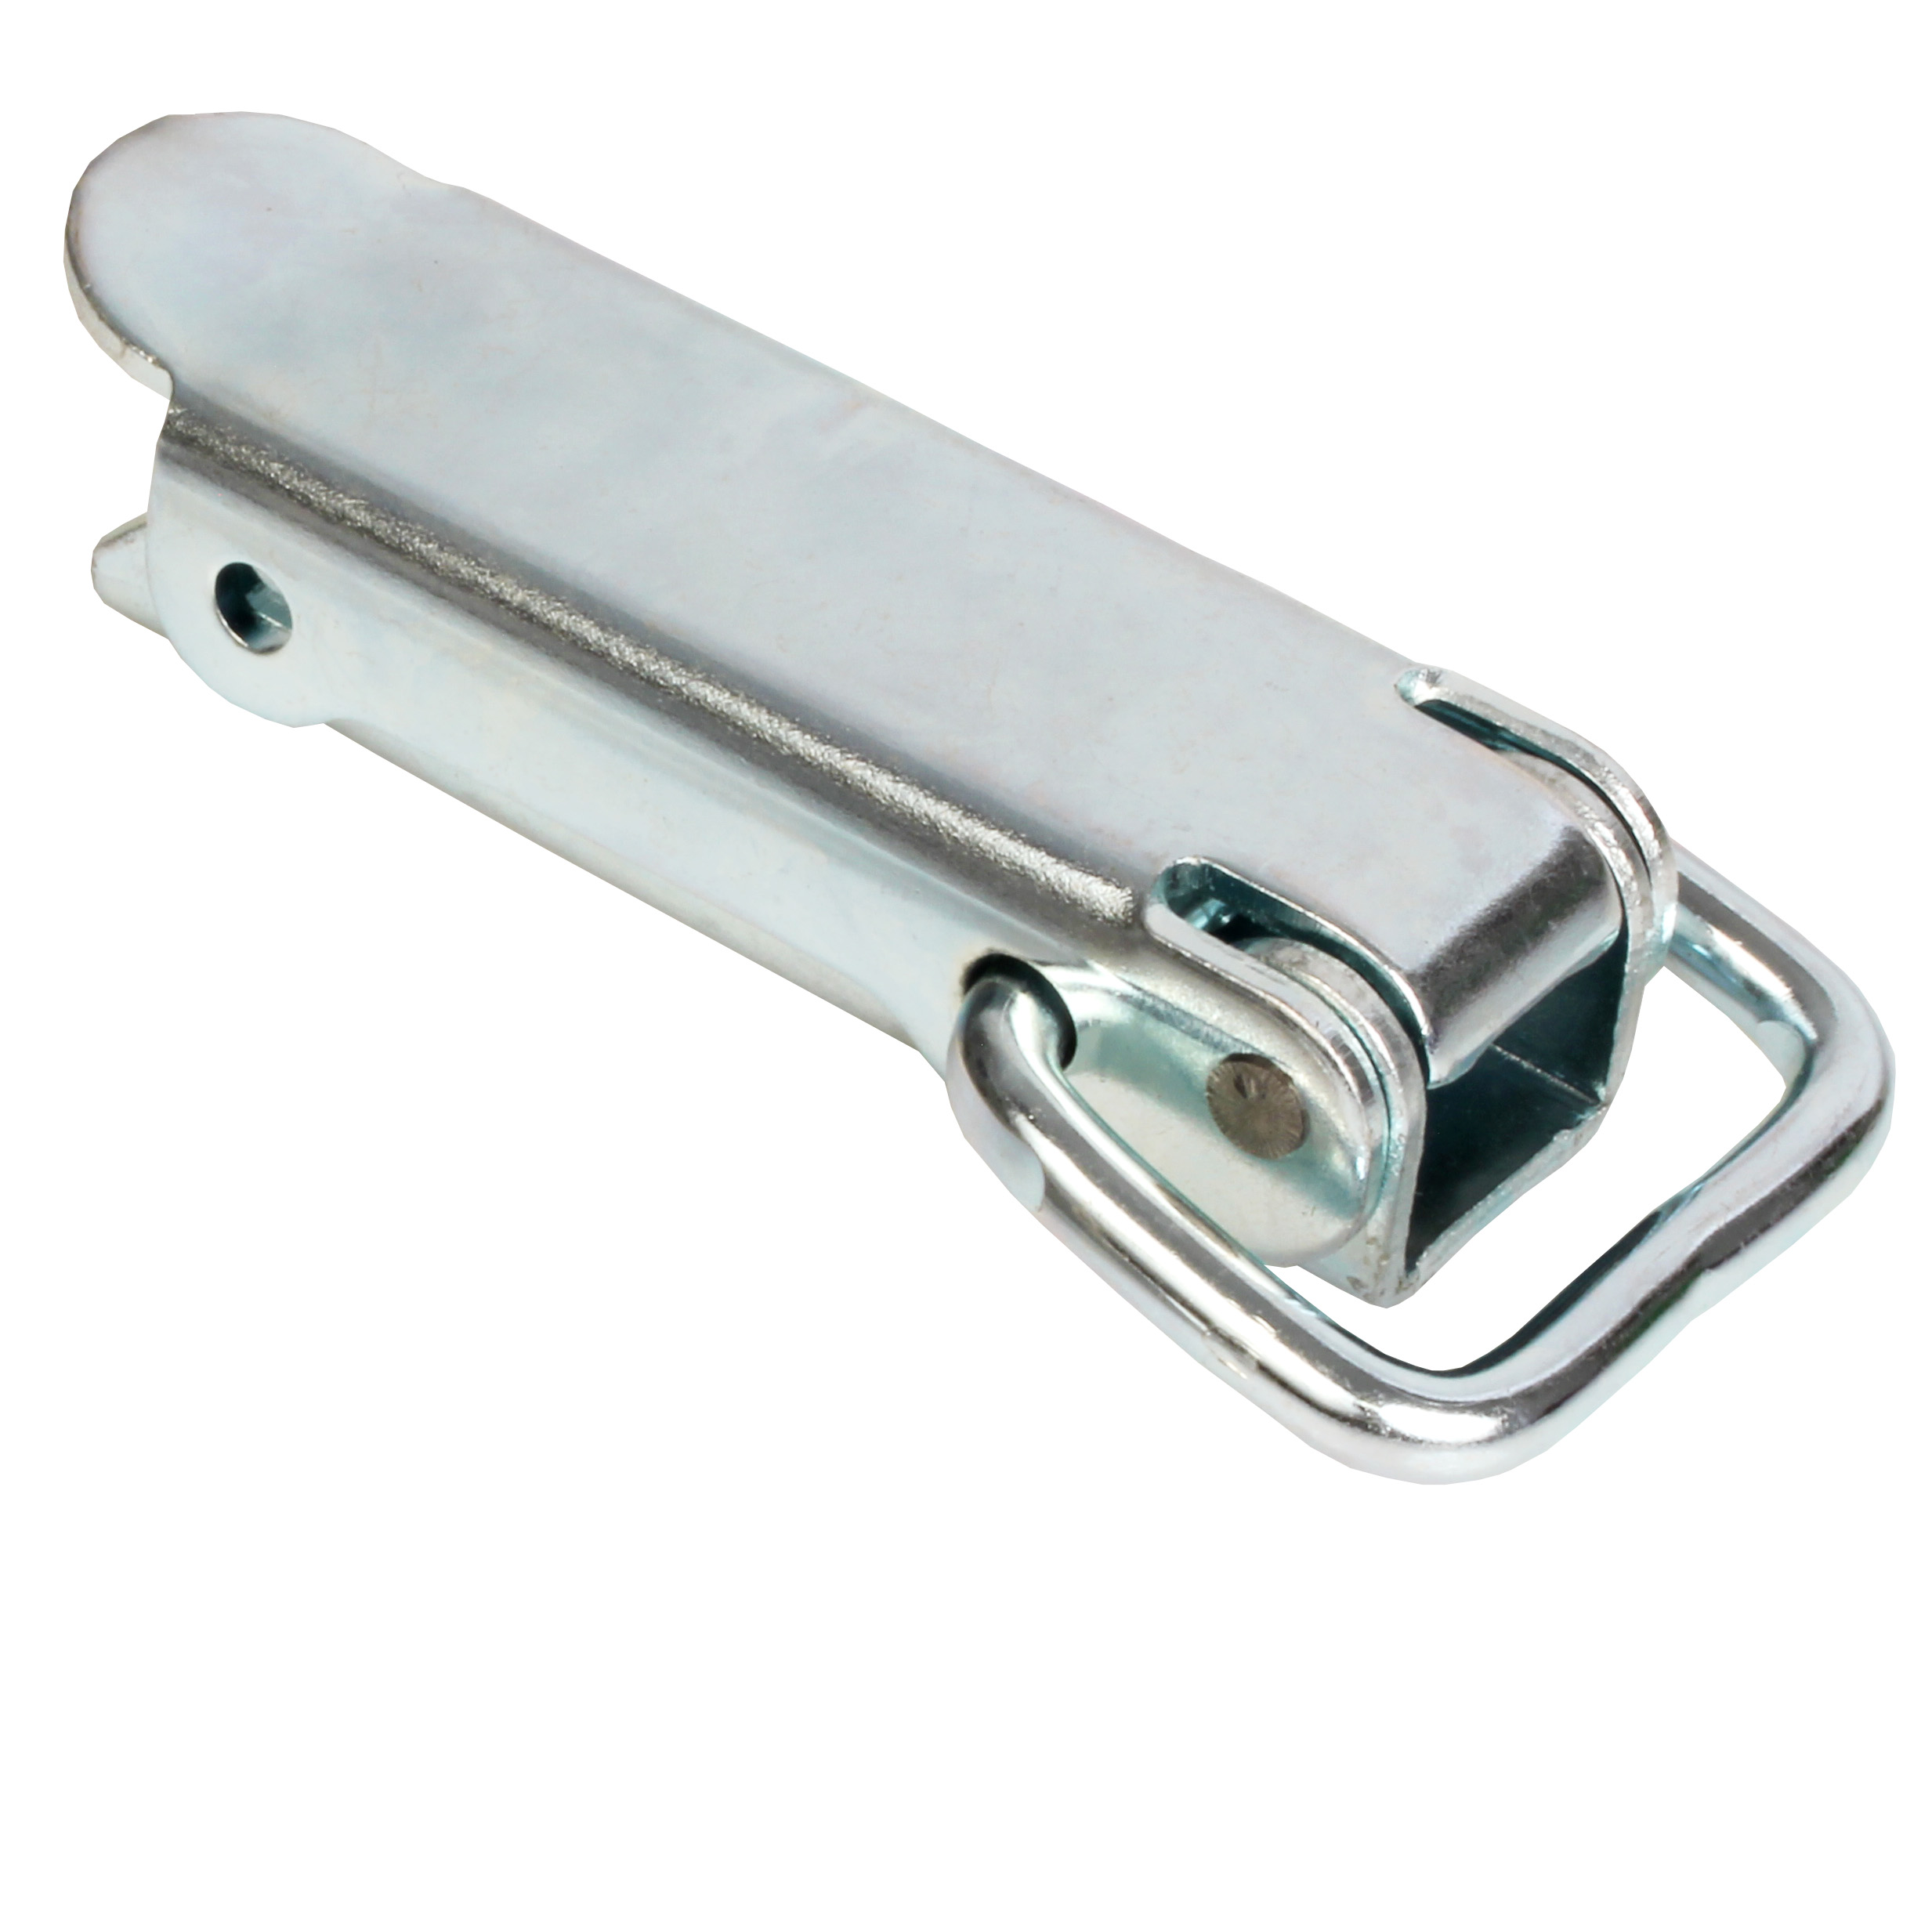 Sprung toggle latch with connecting link - Standard - Steel - 